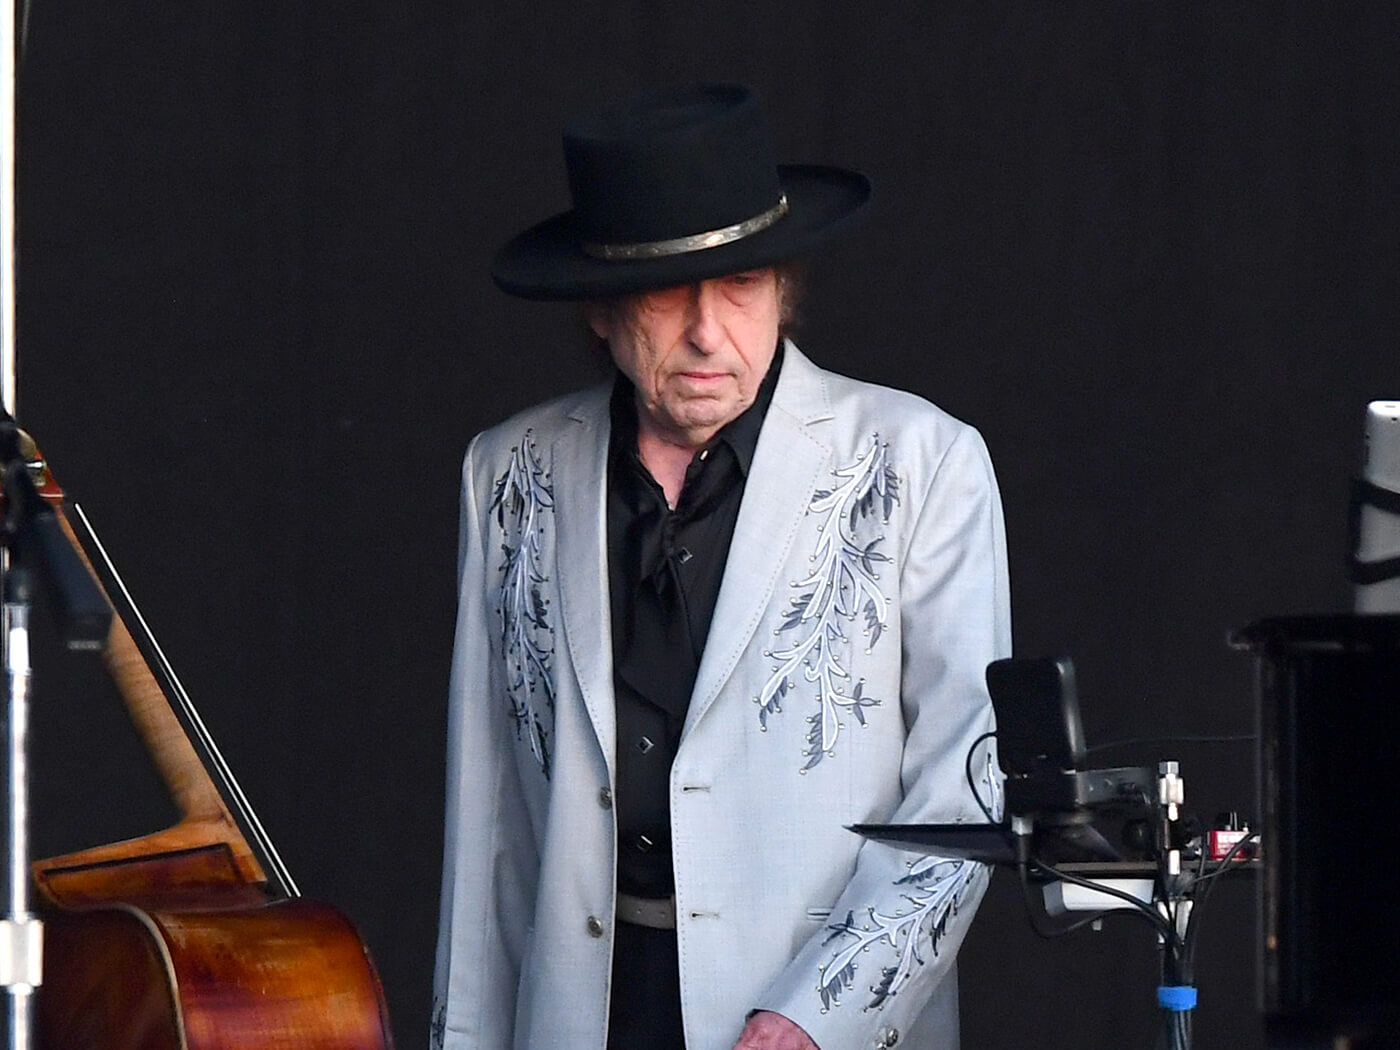 Bob Dylan will be releasing a new book., The Philosophy of Modern Song